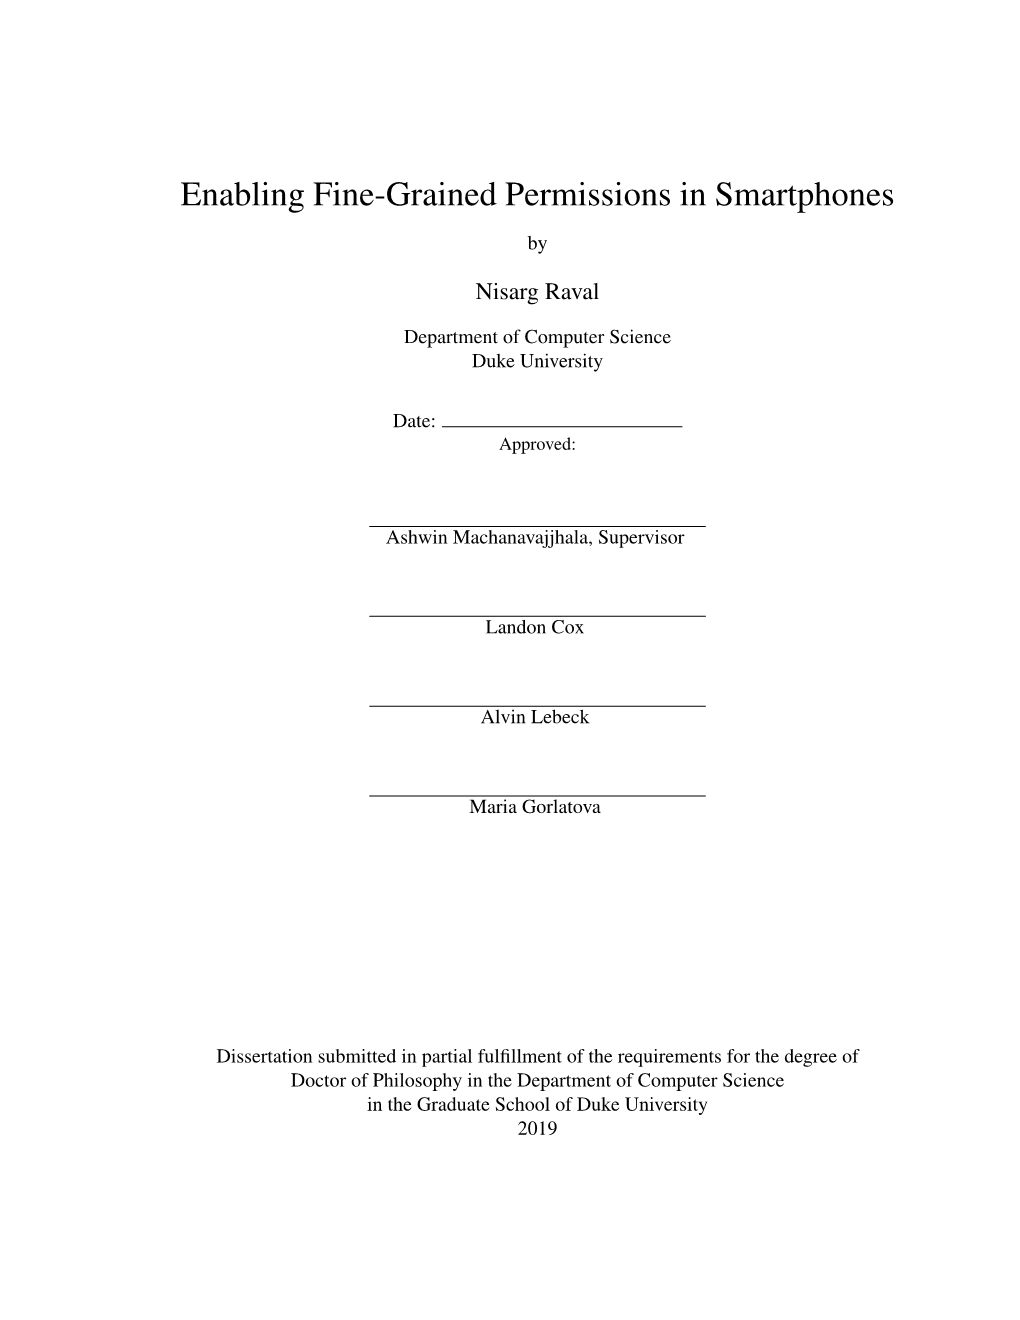 Enabling Fine-Grained Permissions in Smartphones